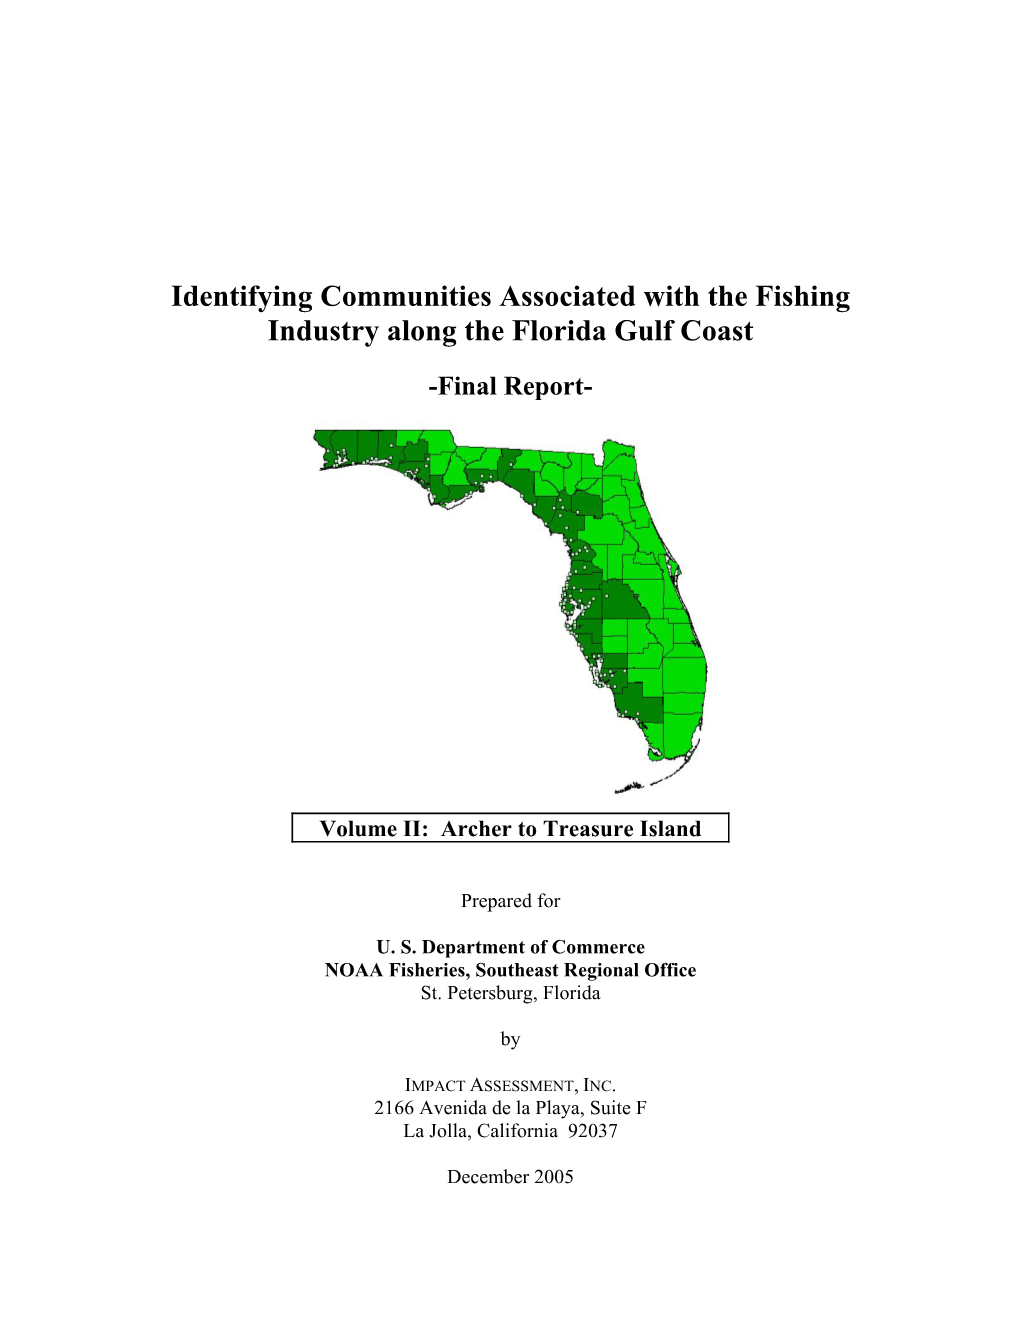 Identifying Communities Associated with the Fishing Industry Along the Florida Gulf Coast